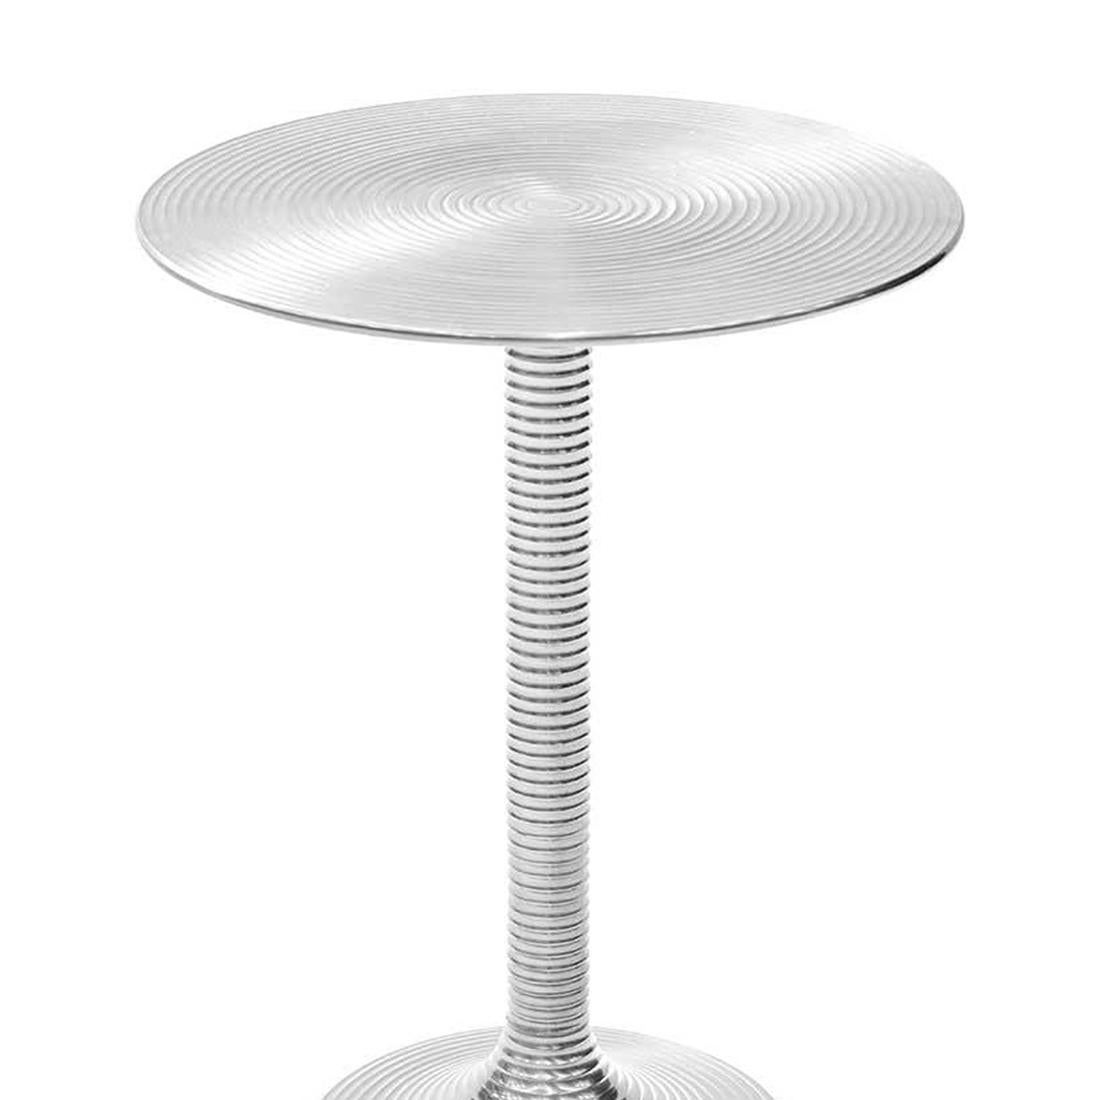 Side table Alu nickel in nickeled
circled aluminium.
Also available in Alu nickel coffee table.